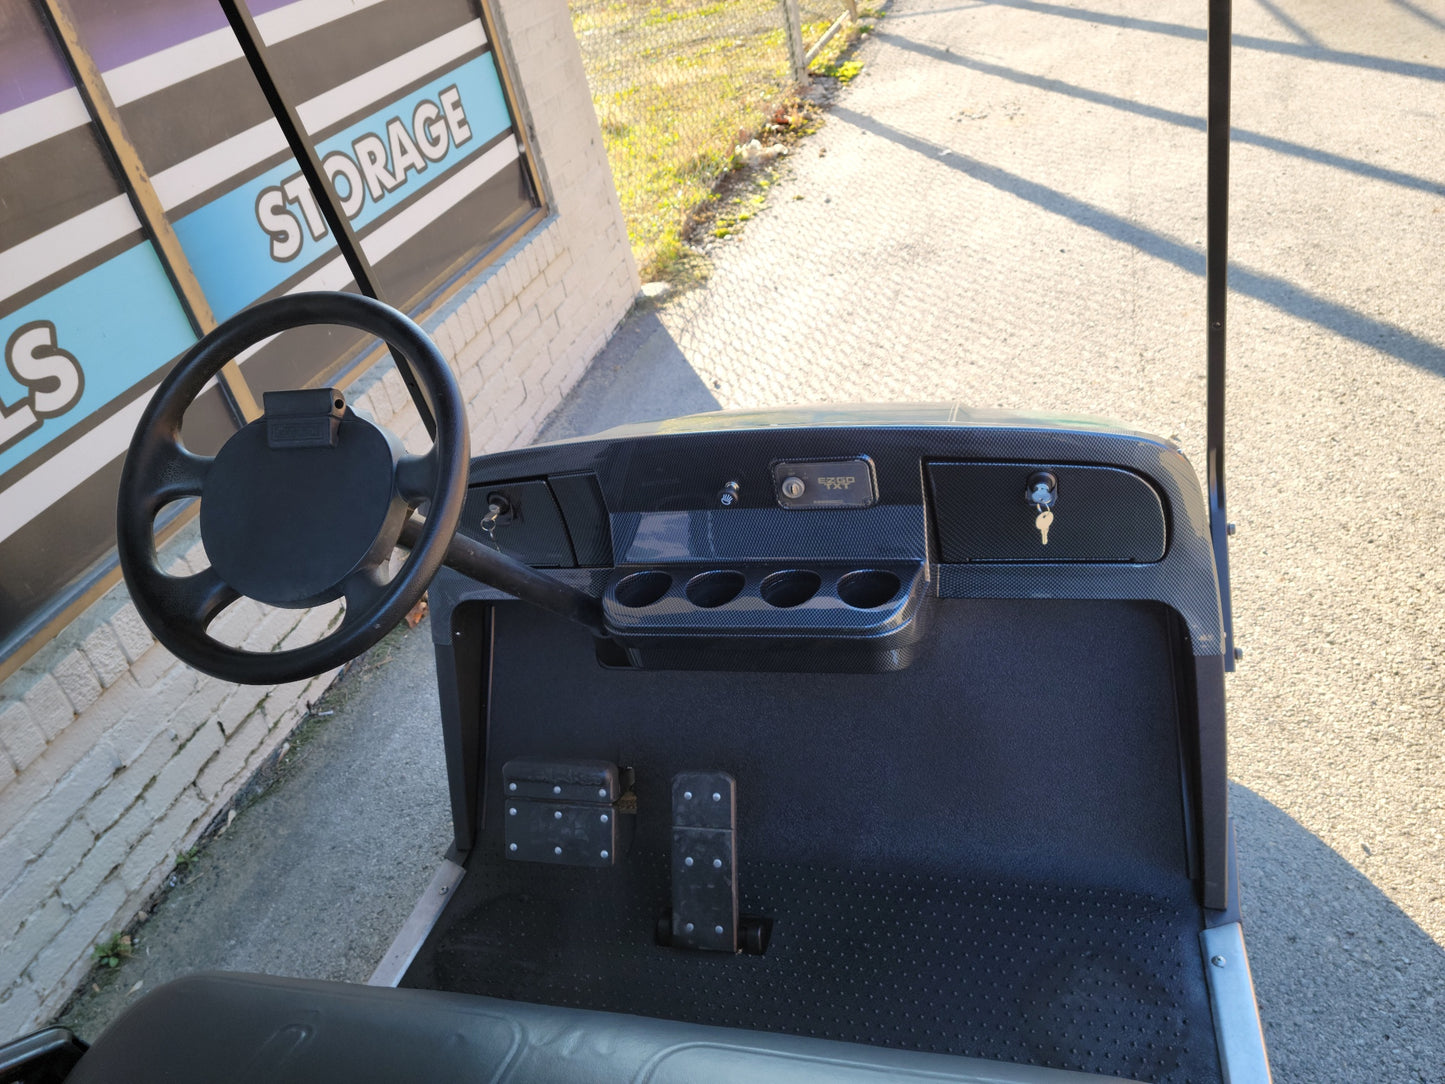 Gas EZGO TXT Golf Cart with black seats and dash SOLD